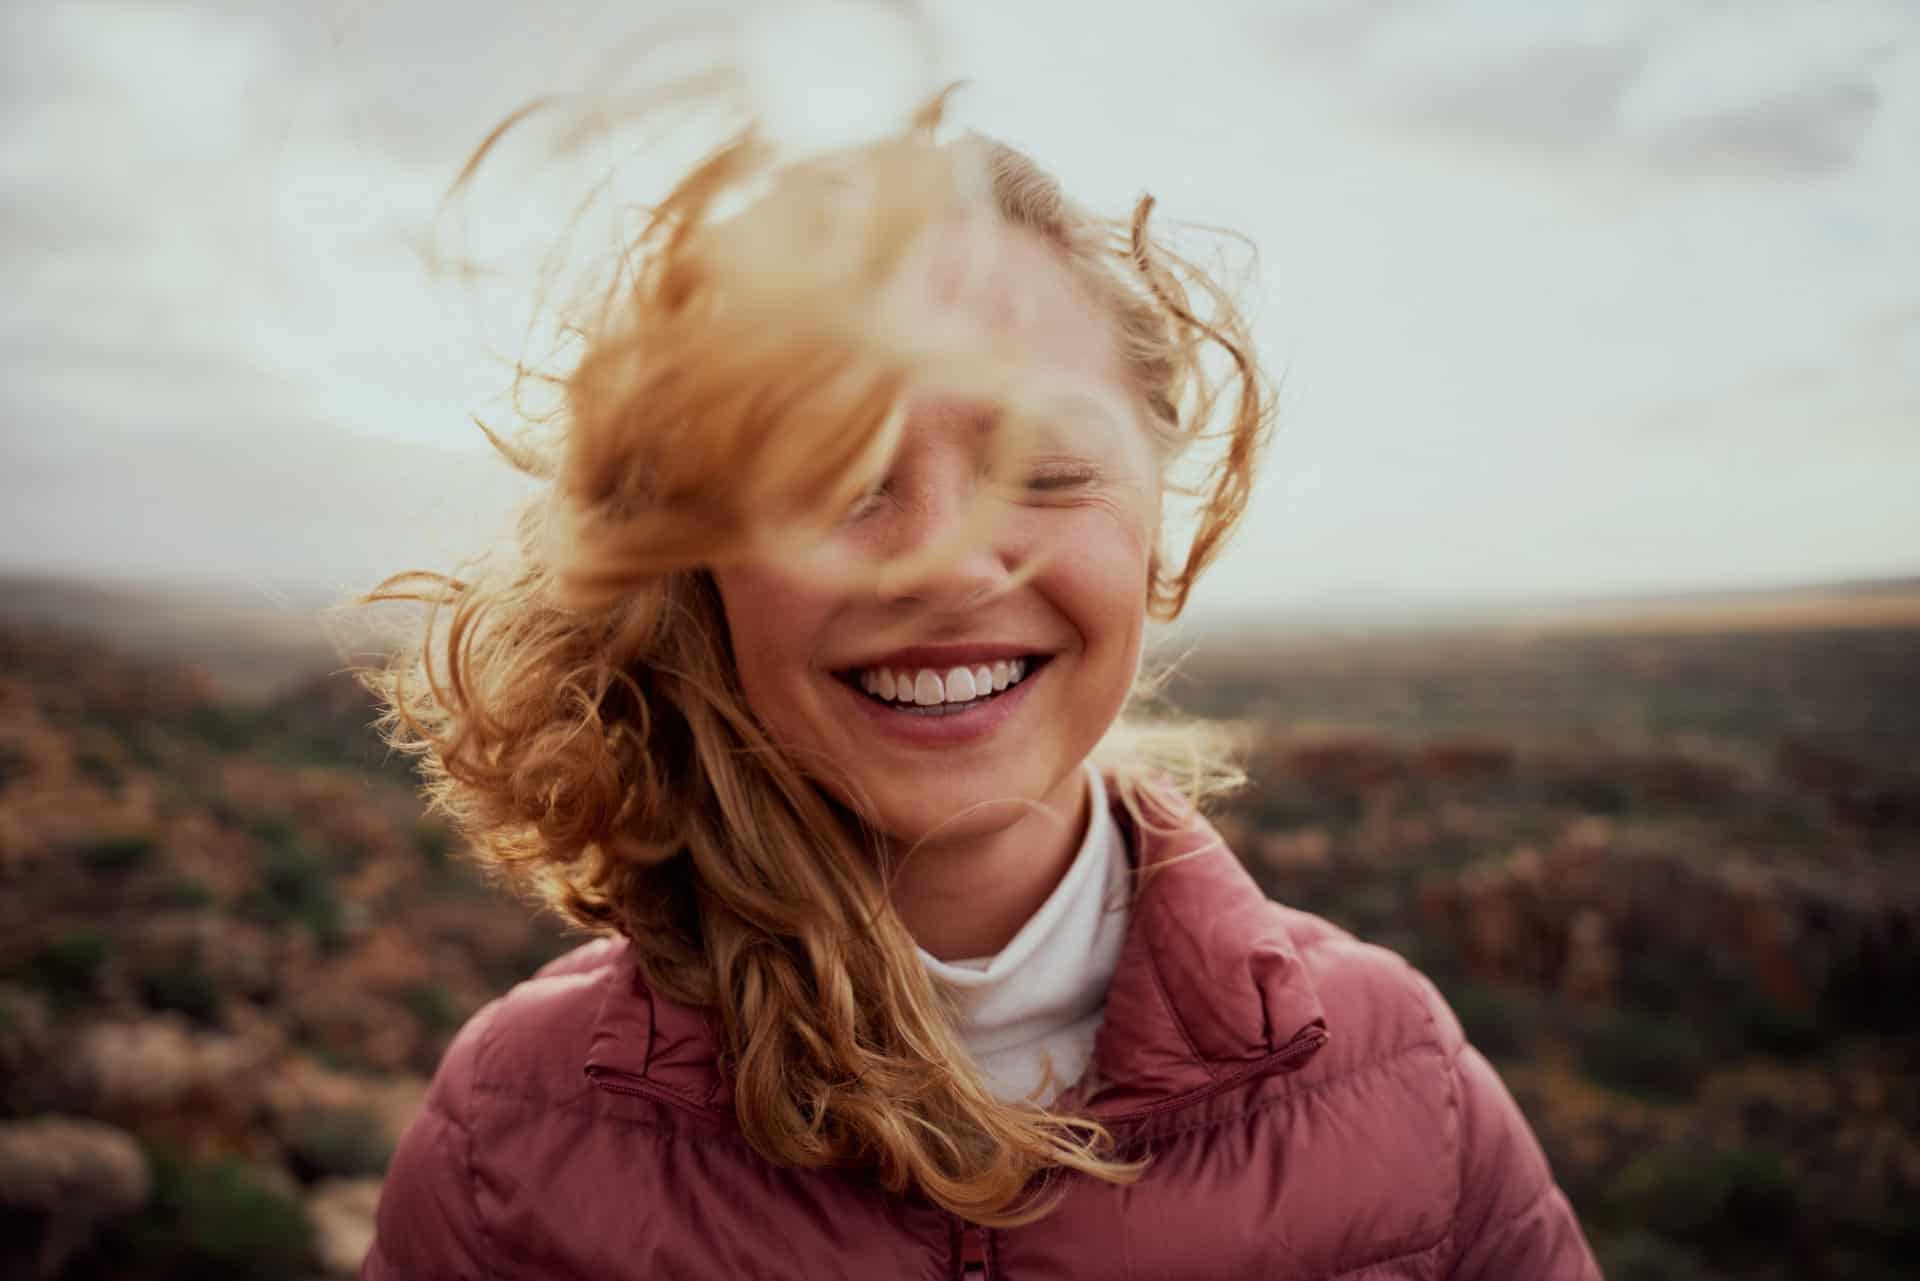 Young woman, smiling, with face partially covered by wind-blown hair